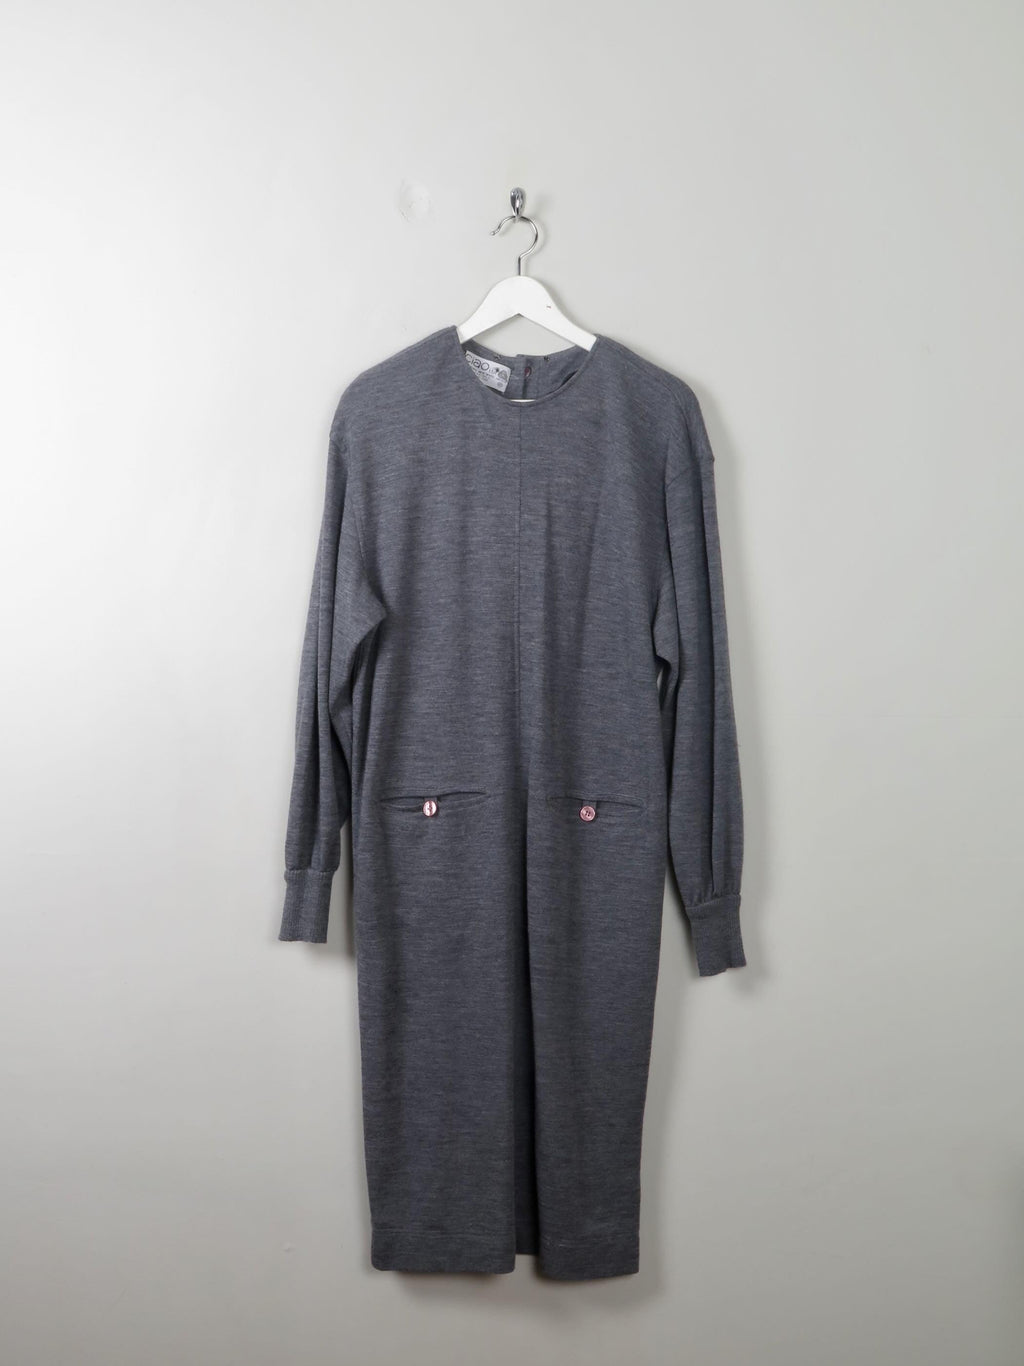 Vintage Grey Ciao Wool Dress S-M - The Harlequin